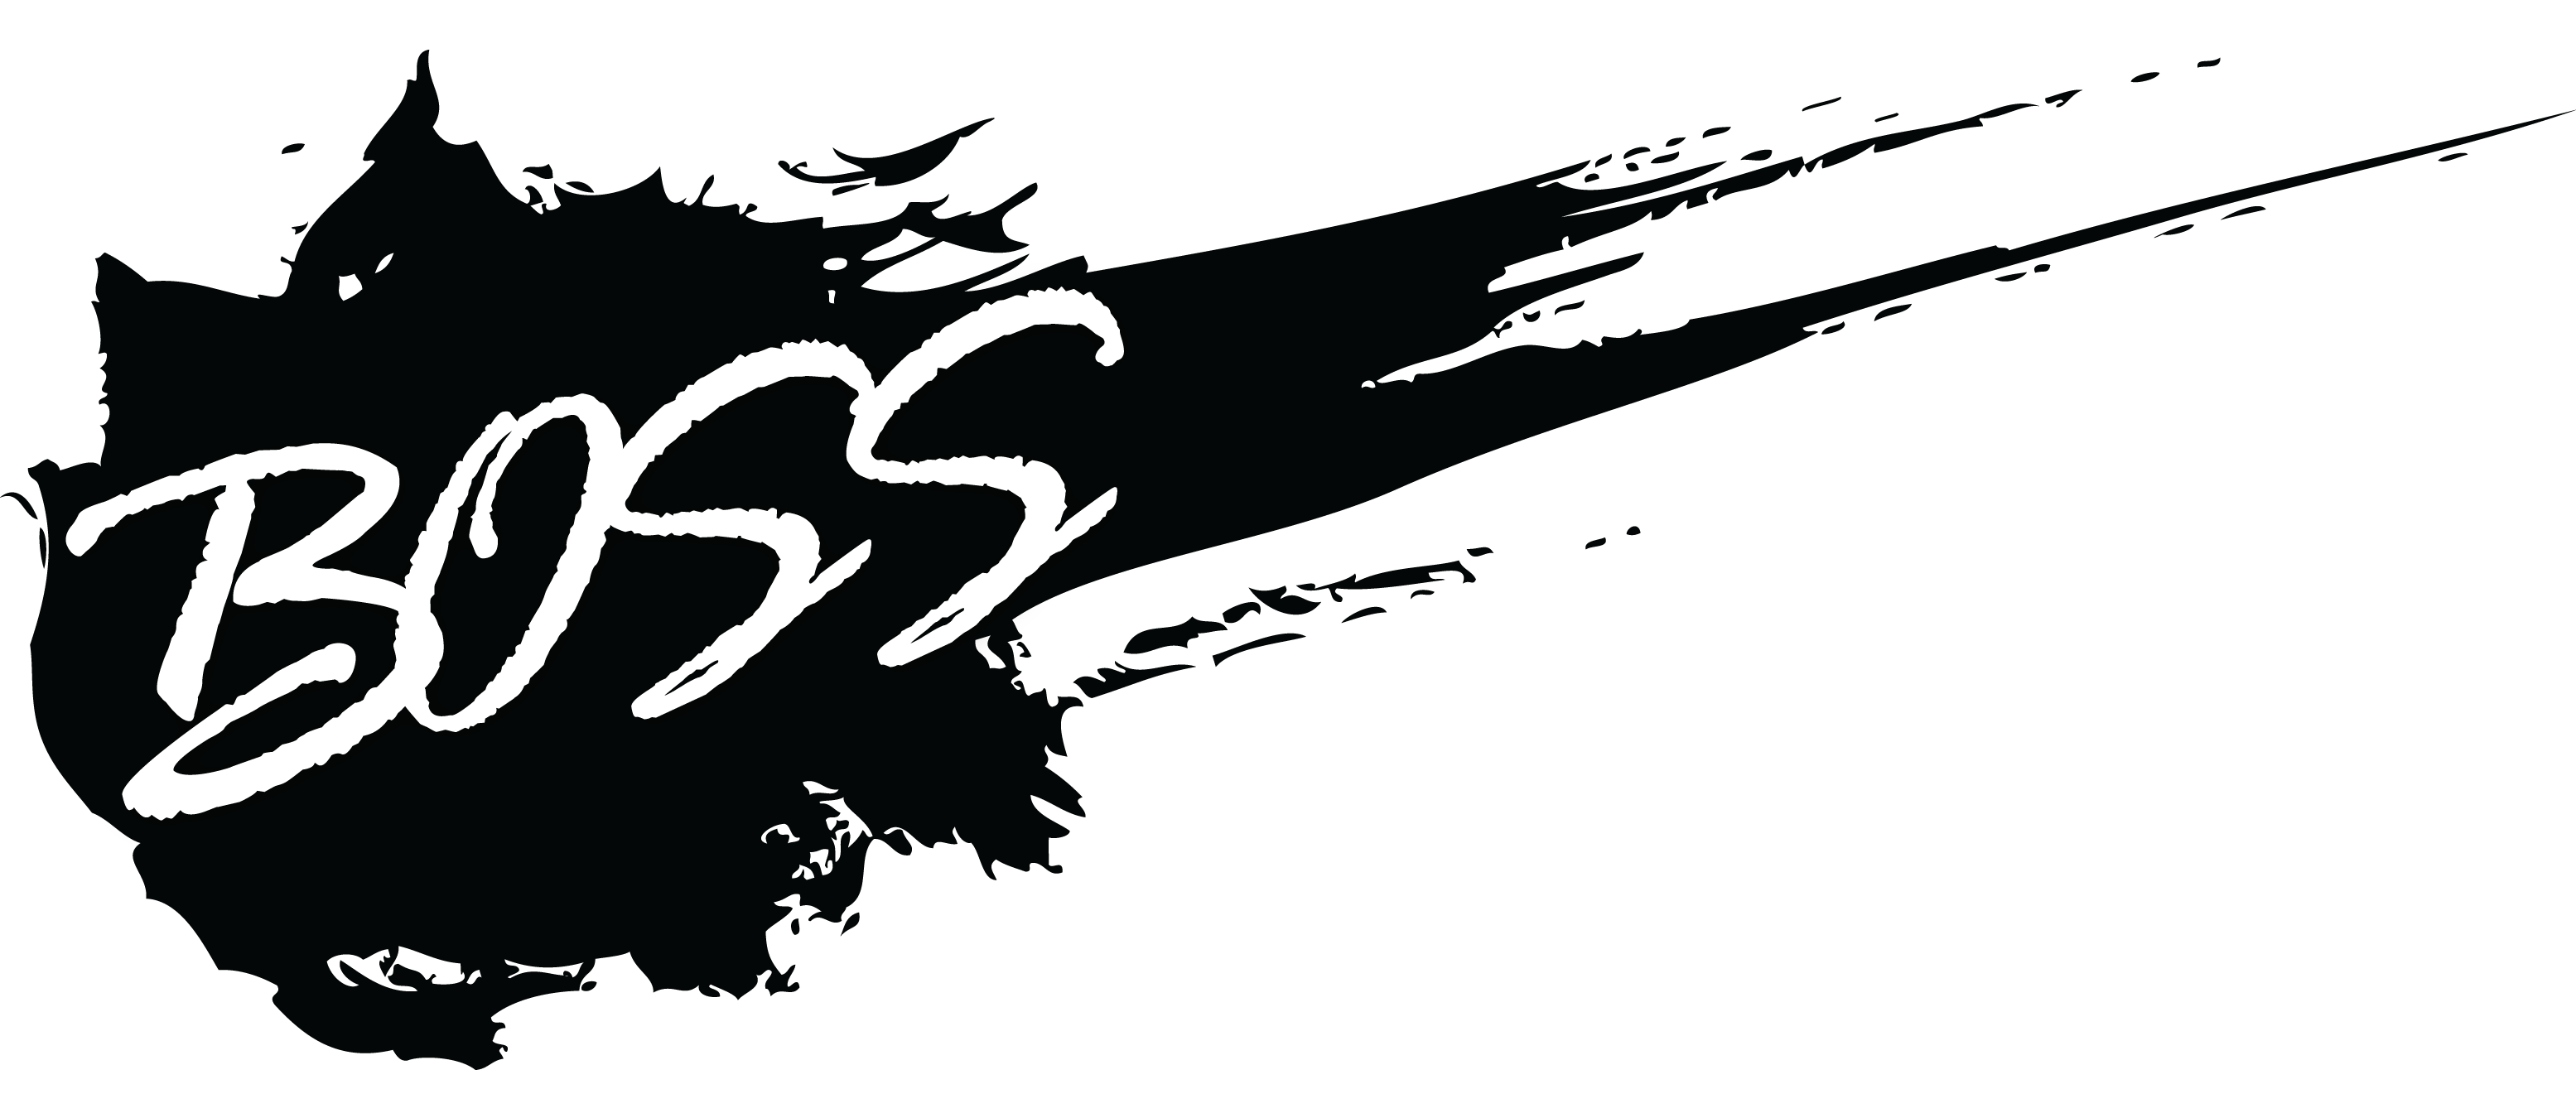 Boss Png Black And White Hdpng.com 3110 - Boss Black And White, Transparent background PNG HD thumbnail